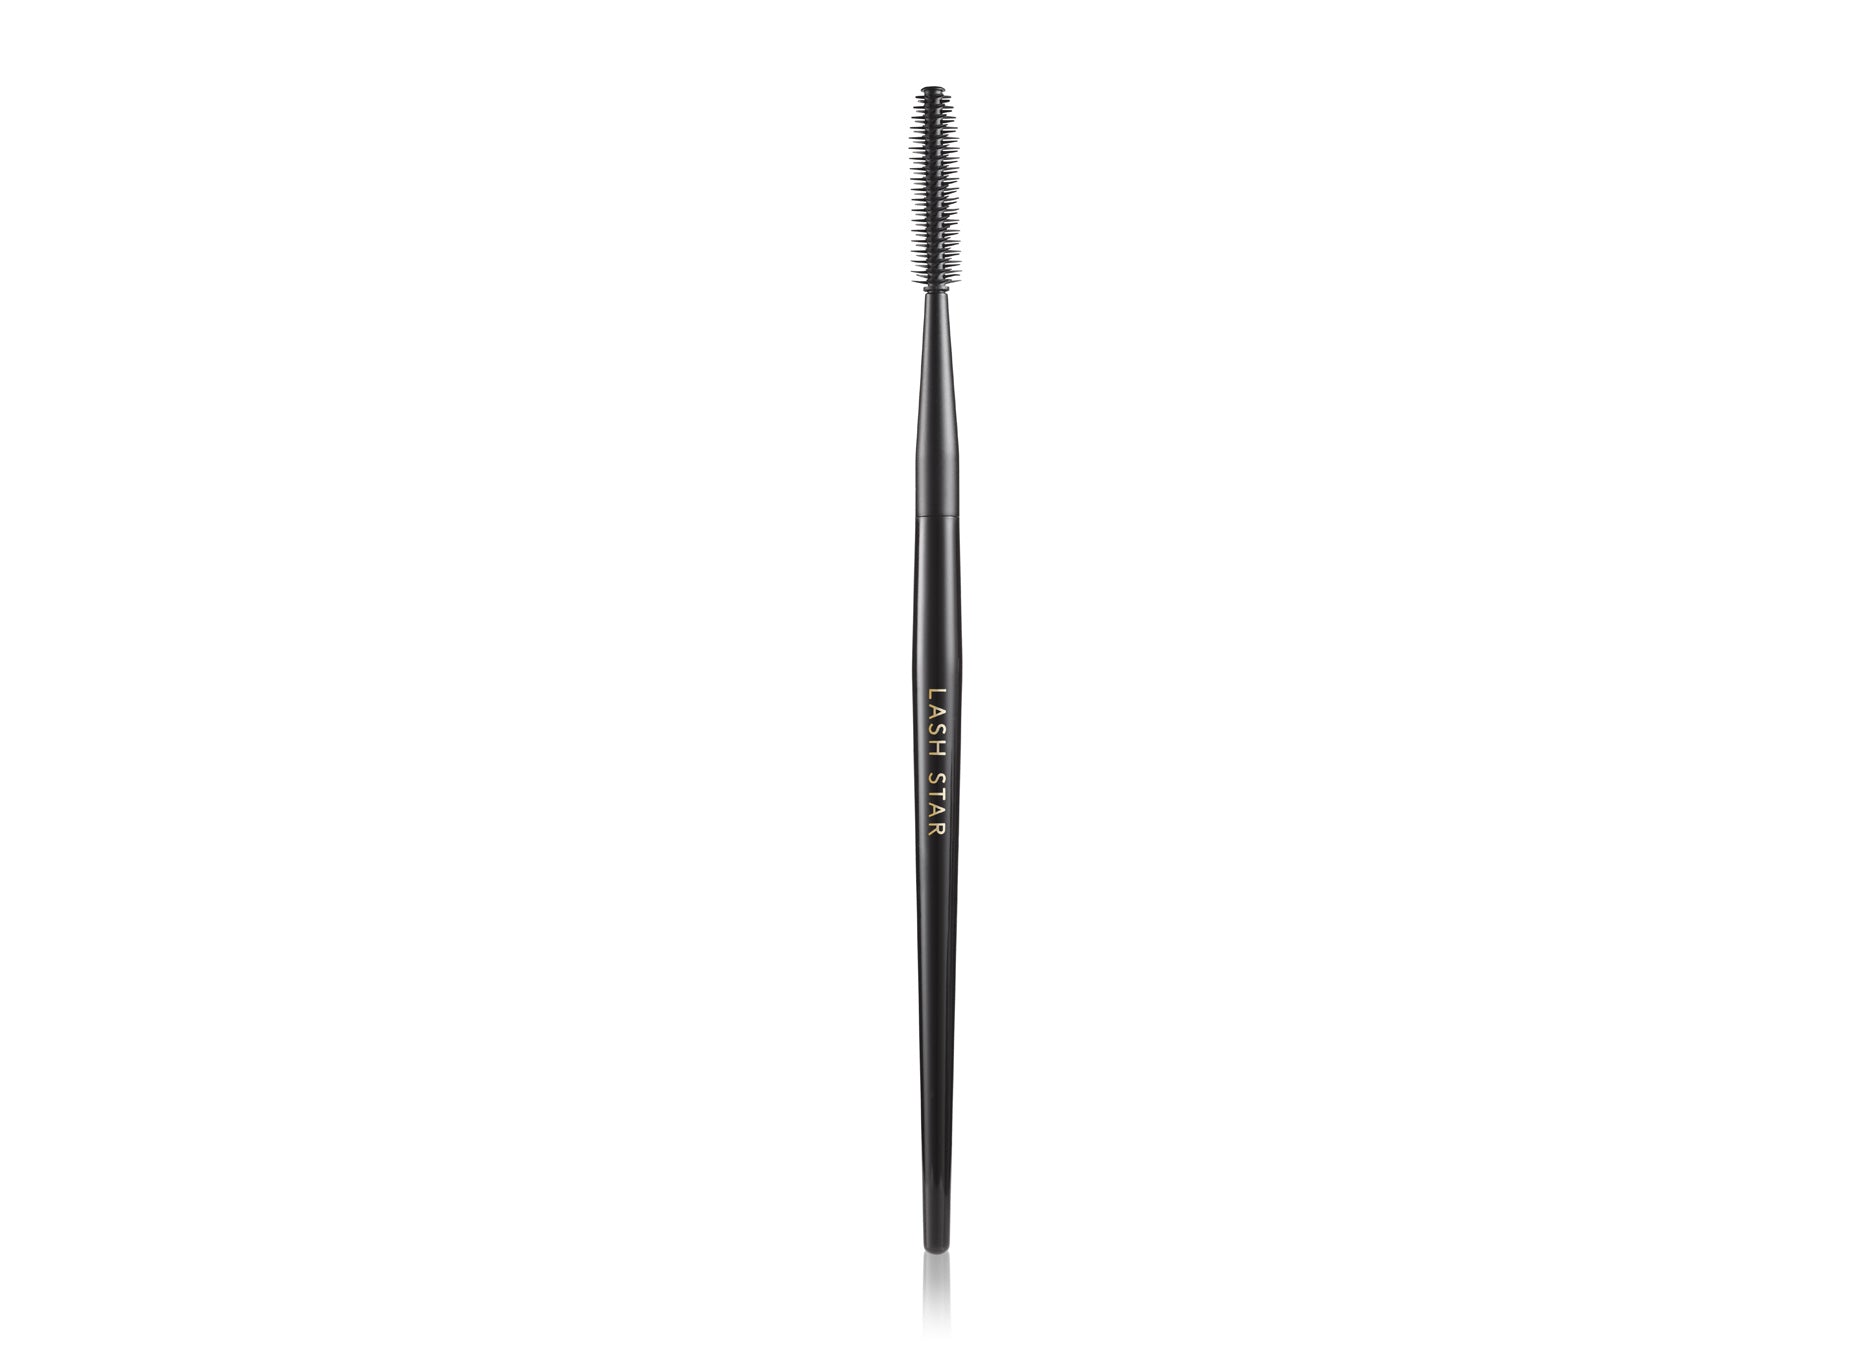 Silicone Brushes - Perfect Coating for Stunning Lashes